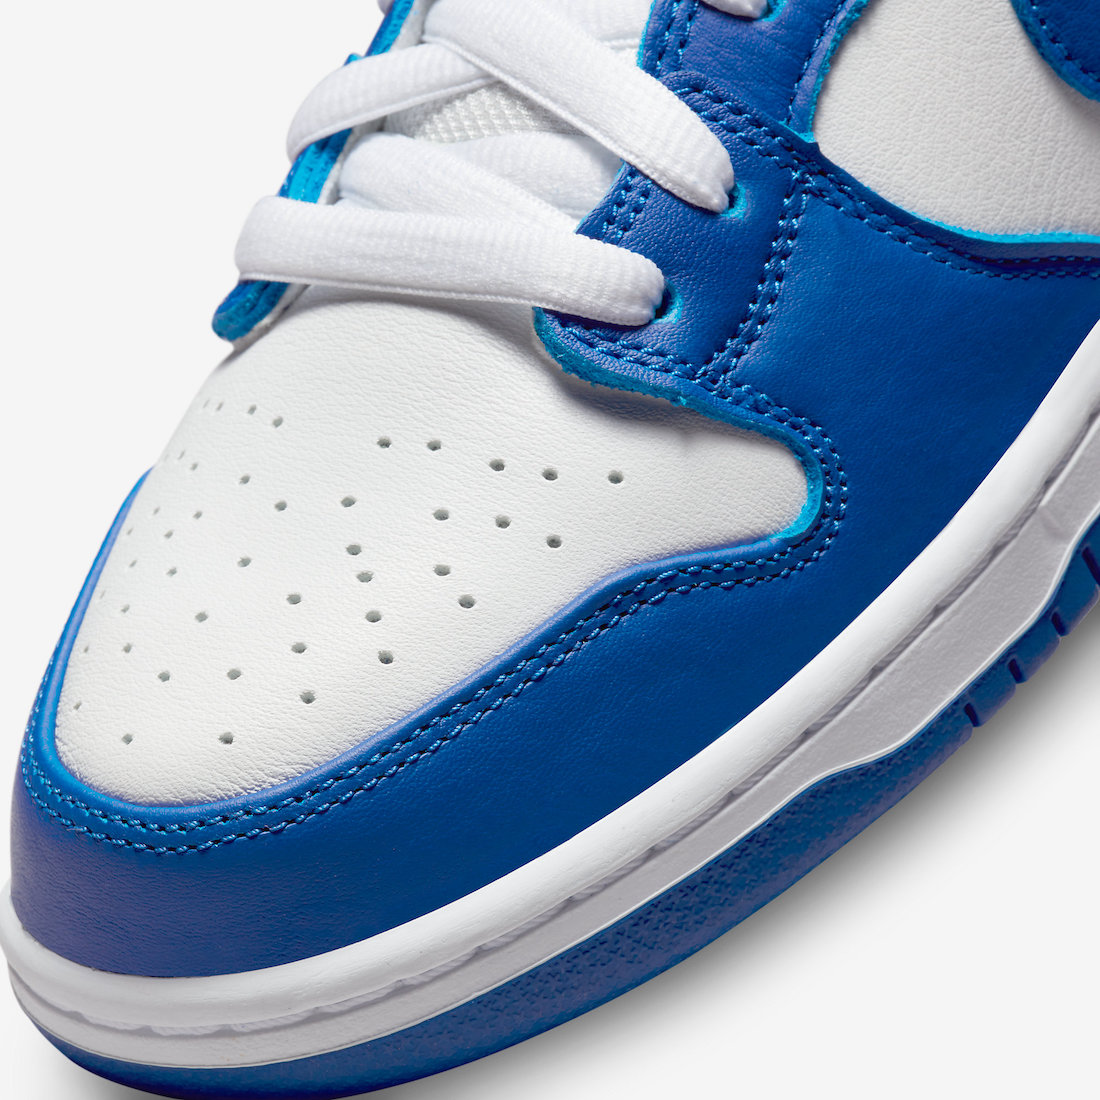 Nike SB Dunk High Pro ISO Kentucky Blue White DH7149 400 Release Date 6